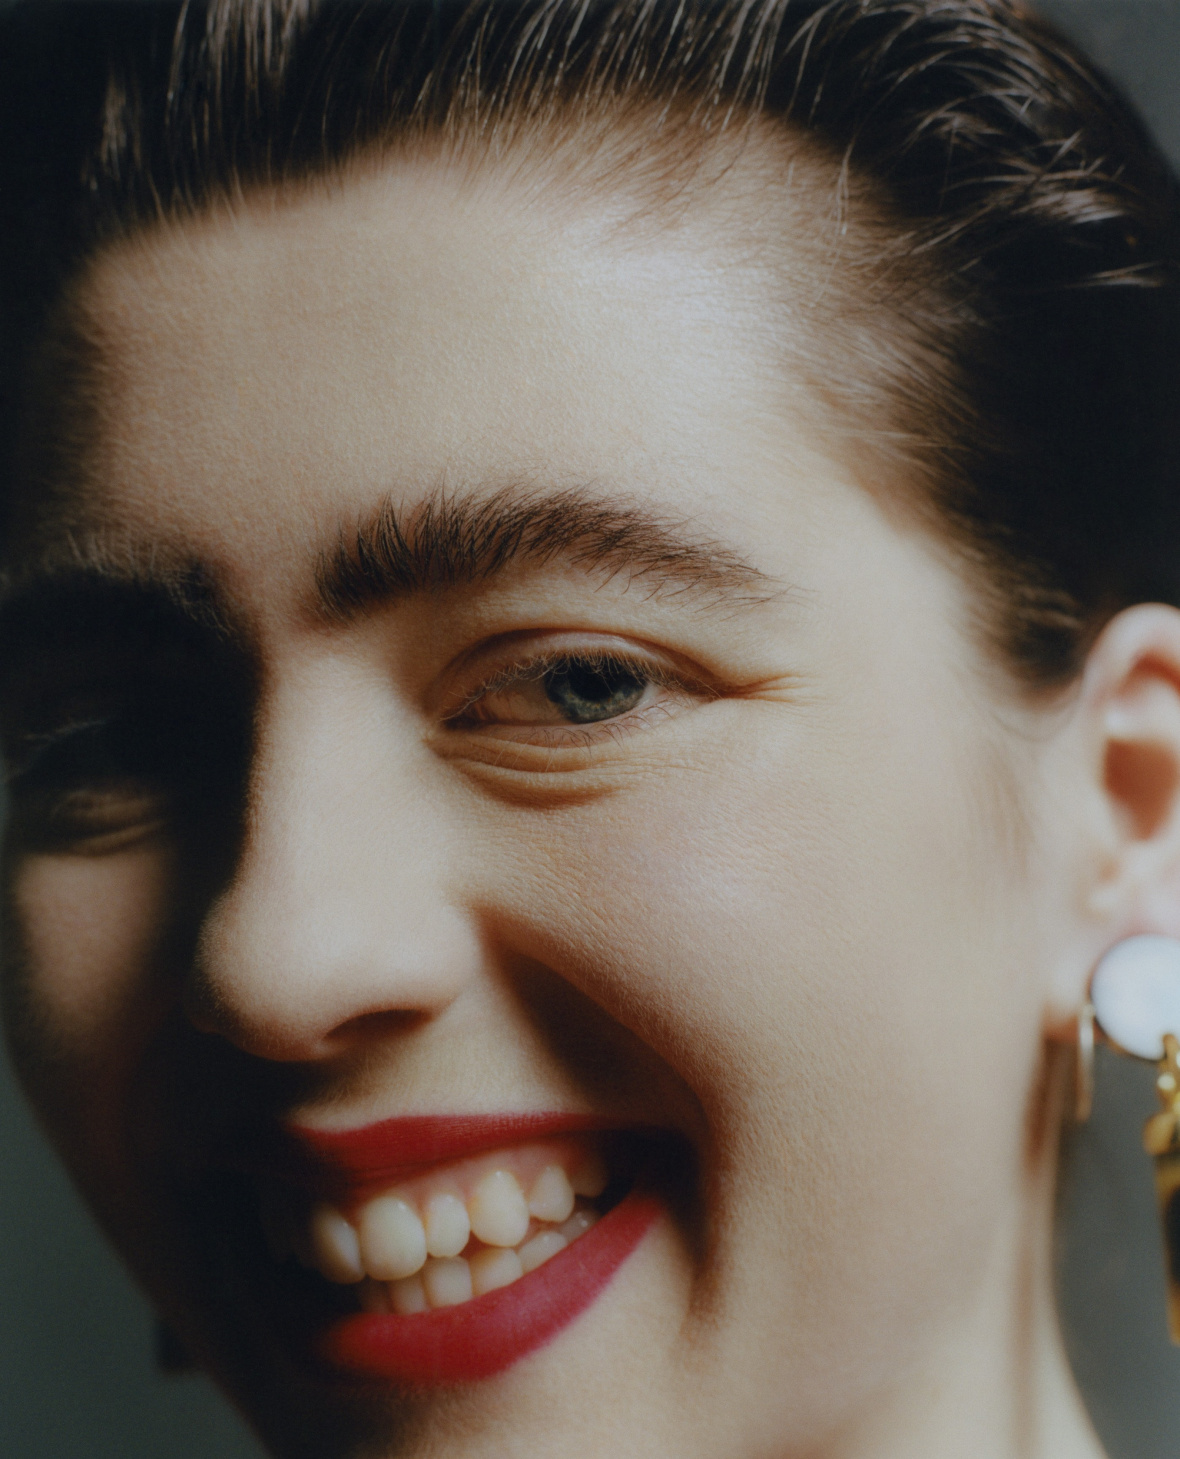 Earrings—National Theatre Archive